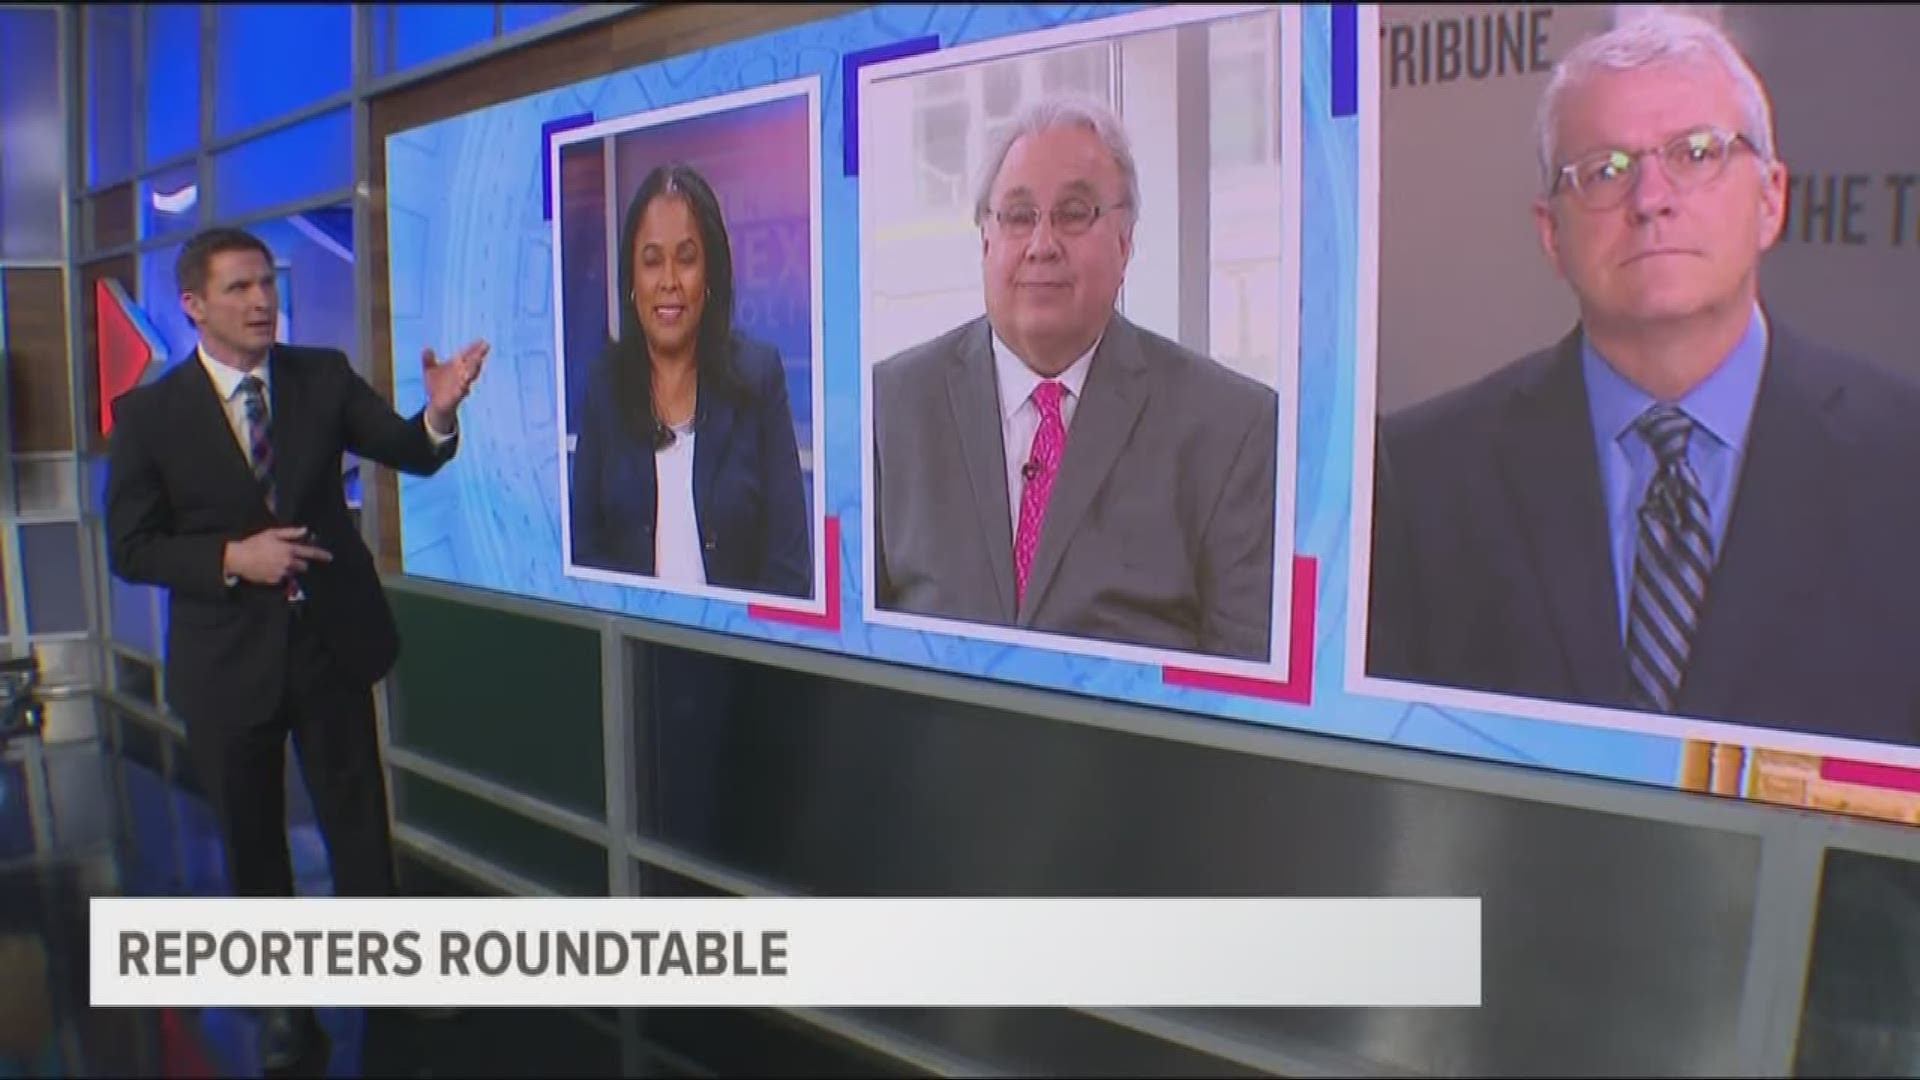 Reporters Roundtable puts the headlines in perspective each week. Ross Ramsey and Bud Kennedy returned along with Berna Dean Steptoe, WFAA’s political producer. Ross, Bud and  Berna Dean joined host Jason Wheeler, filling in for Jason Whitely, to discuss the third Democratic presidential debate. The September debate will be held in Houston, Texas.